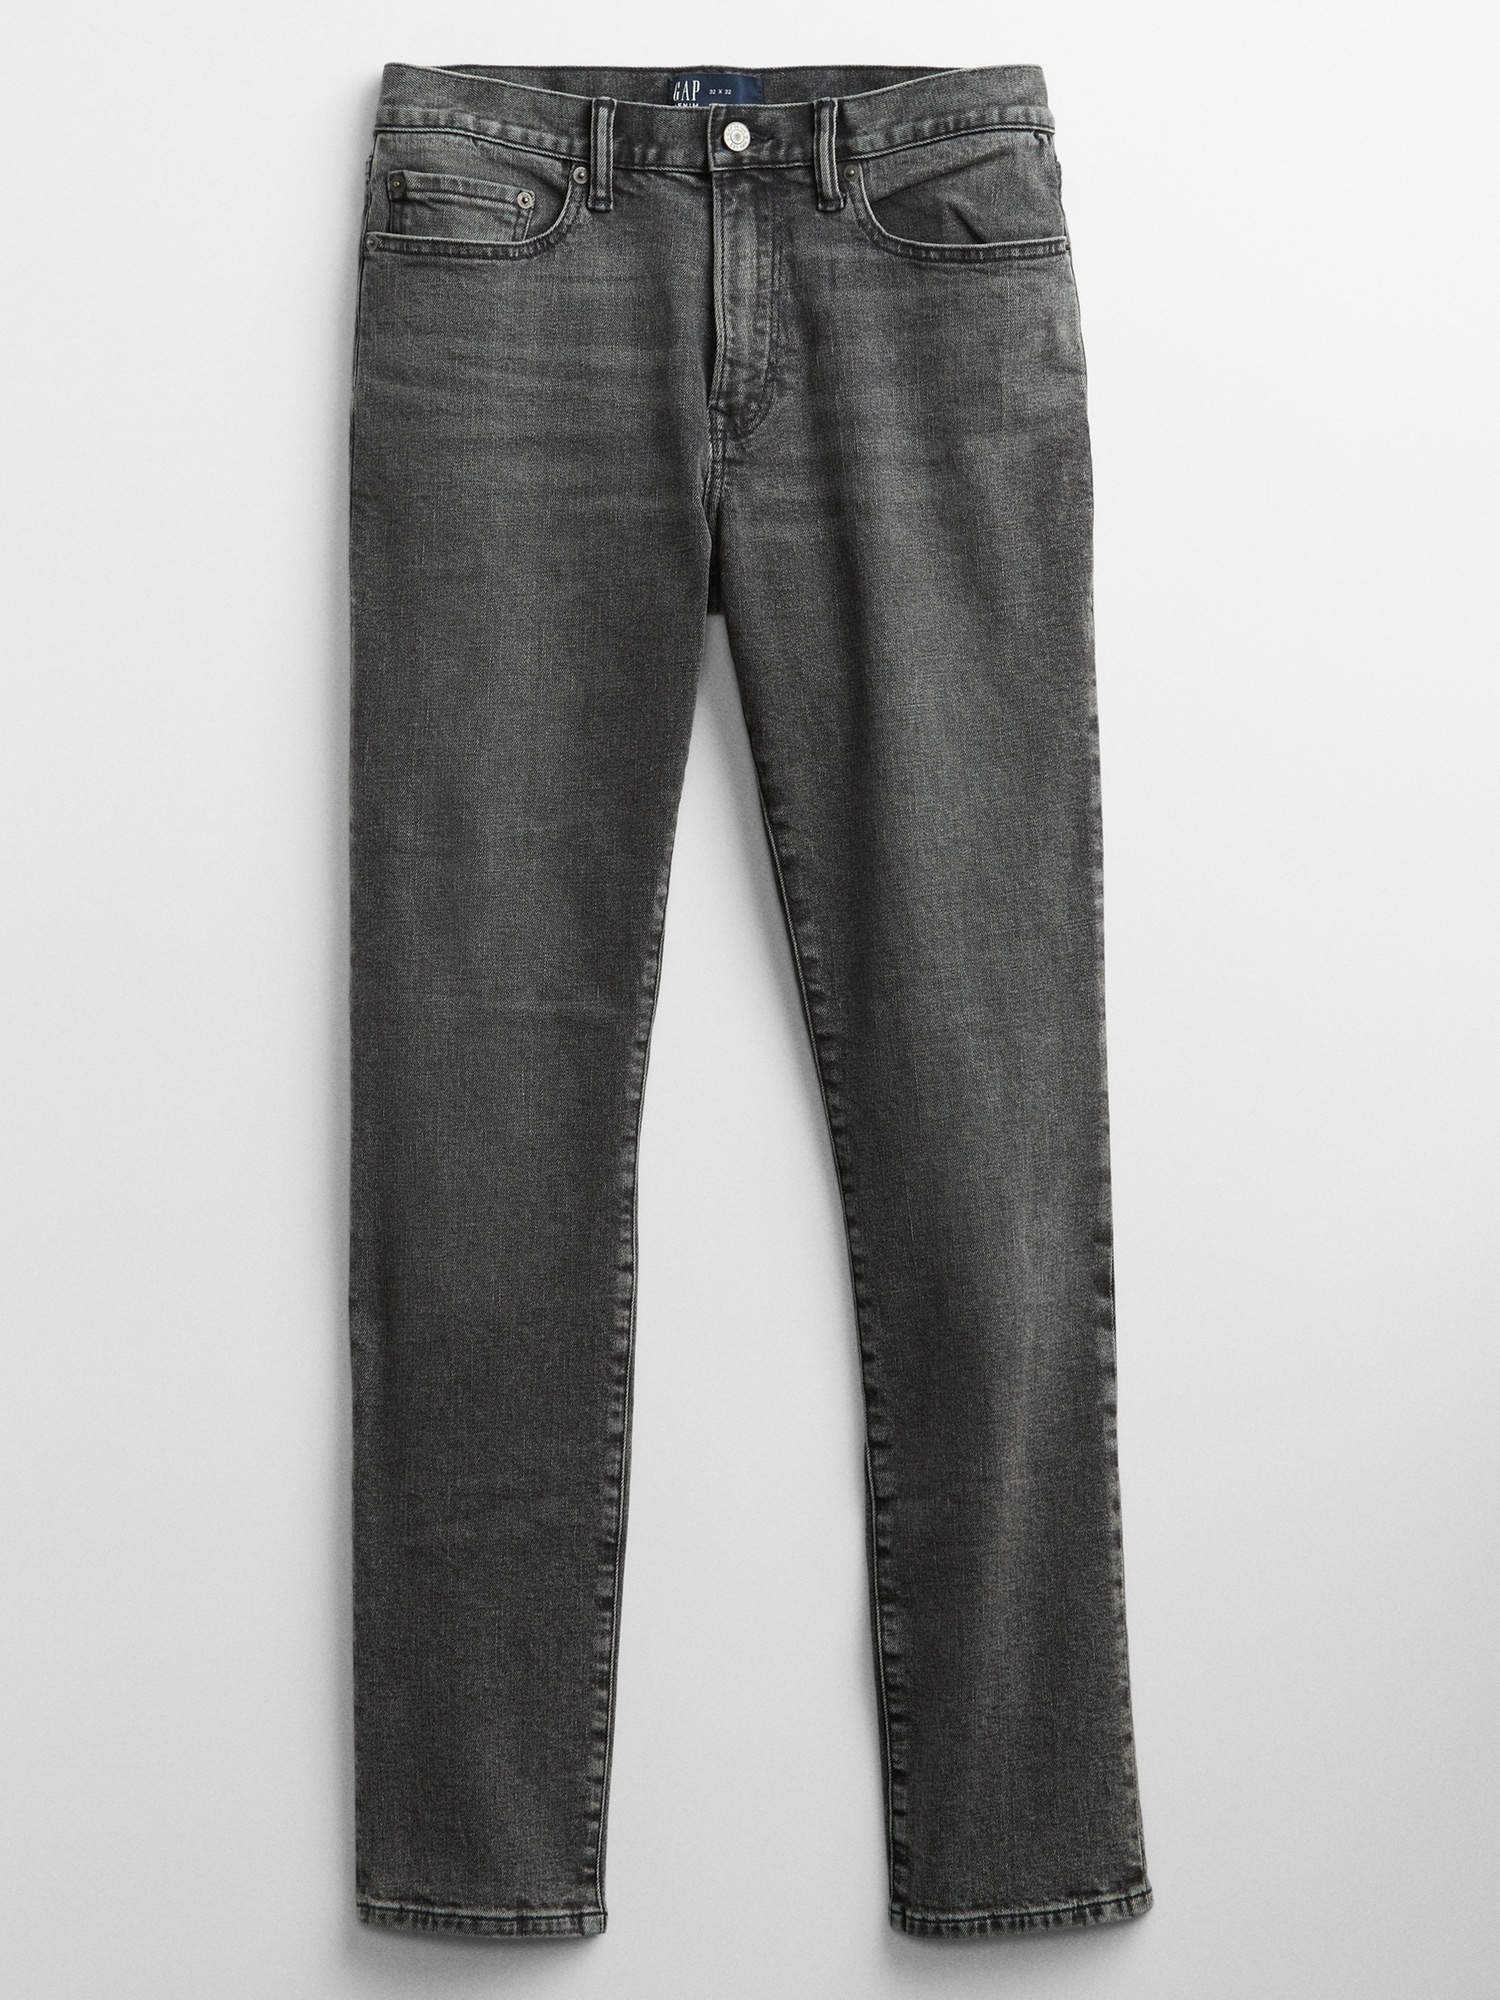 Slim Jeans with Washwell | Gap Factory